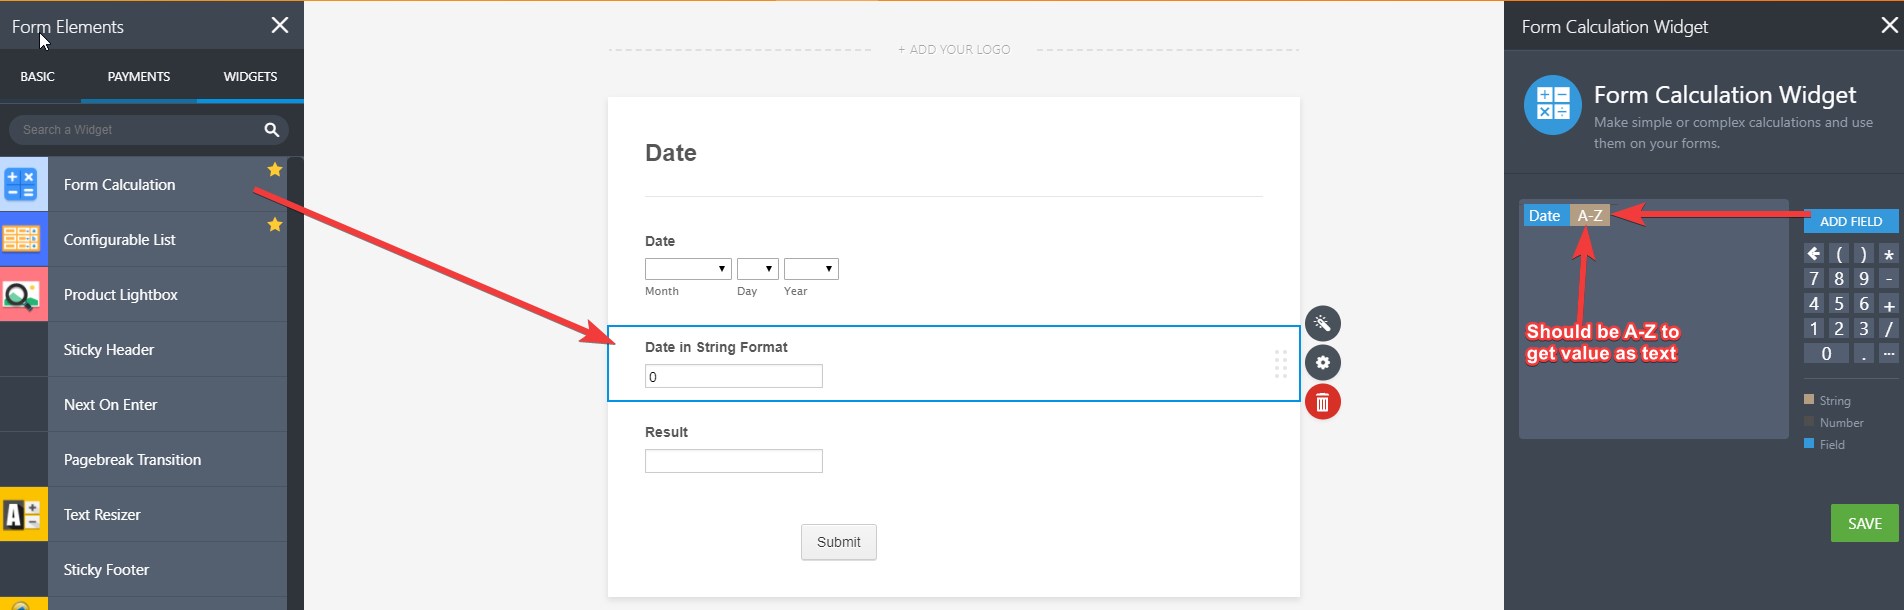 How can I create a booking form for tours with calculations? Image 2 Screenshot 61